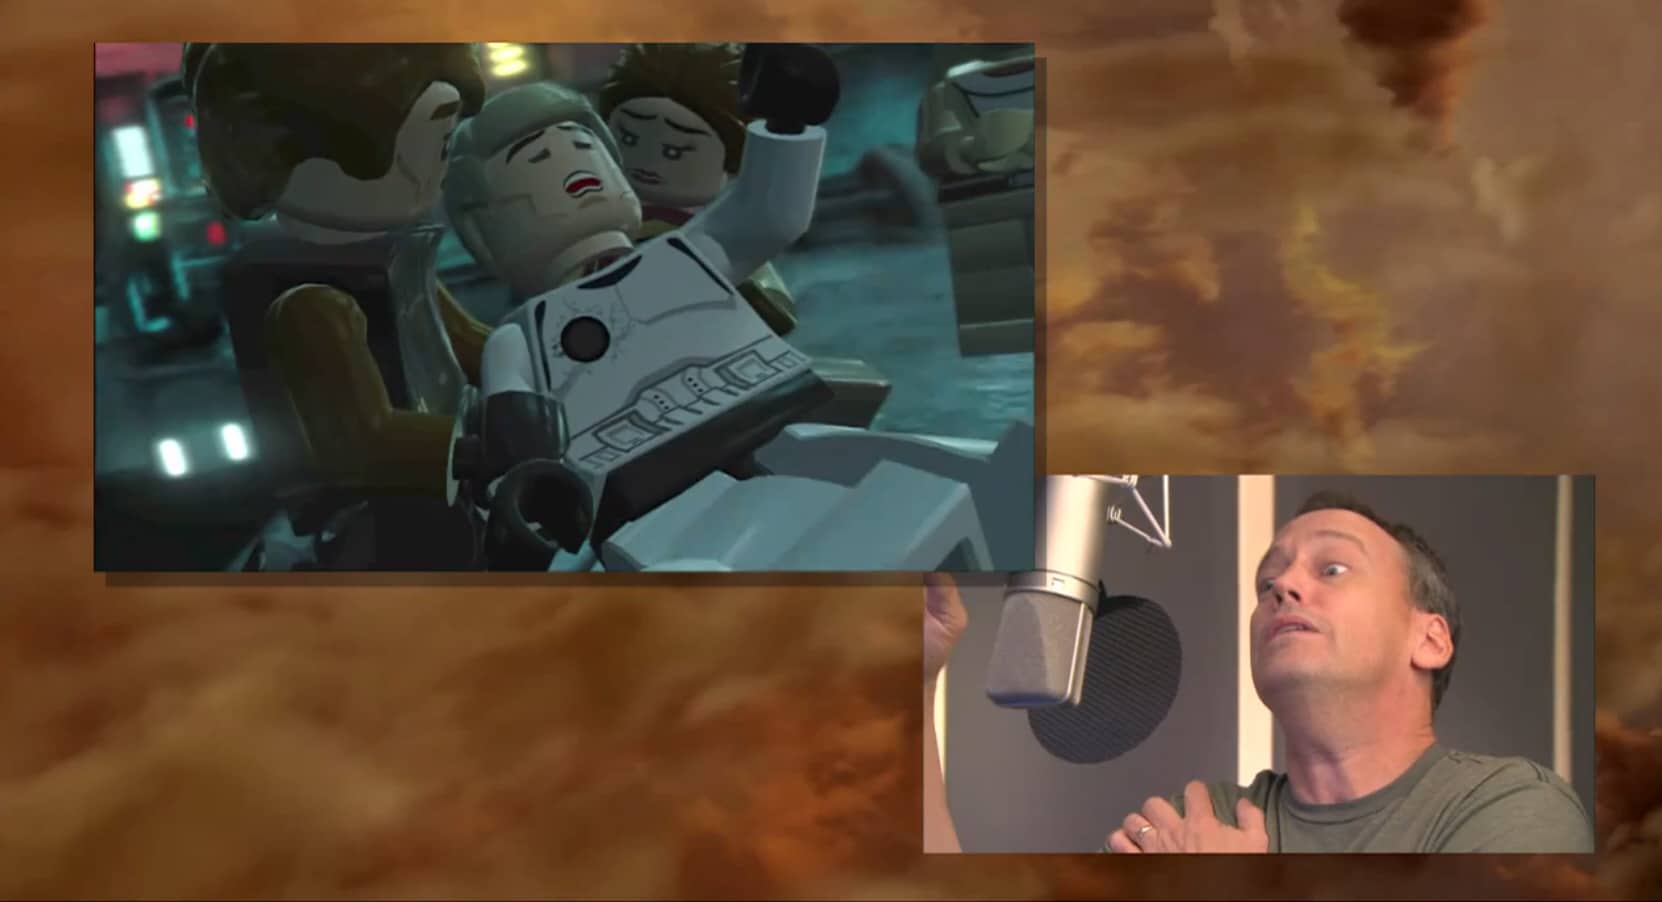 Lego Star Wars 3 voice actors how talk as People - Video Games Blogger